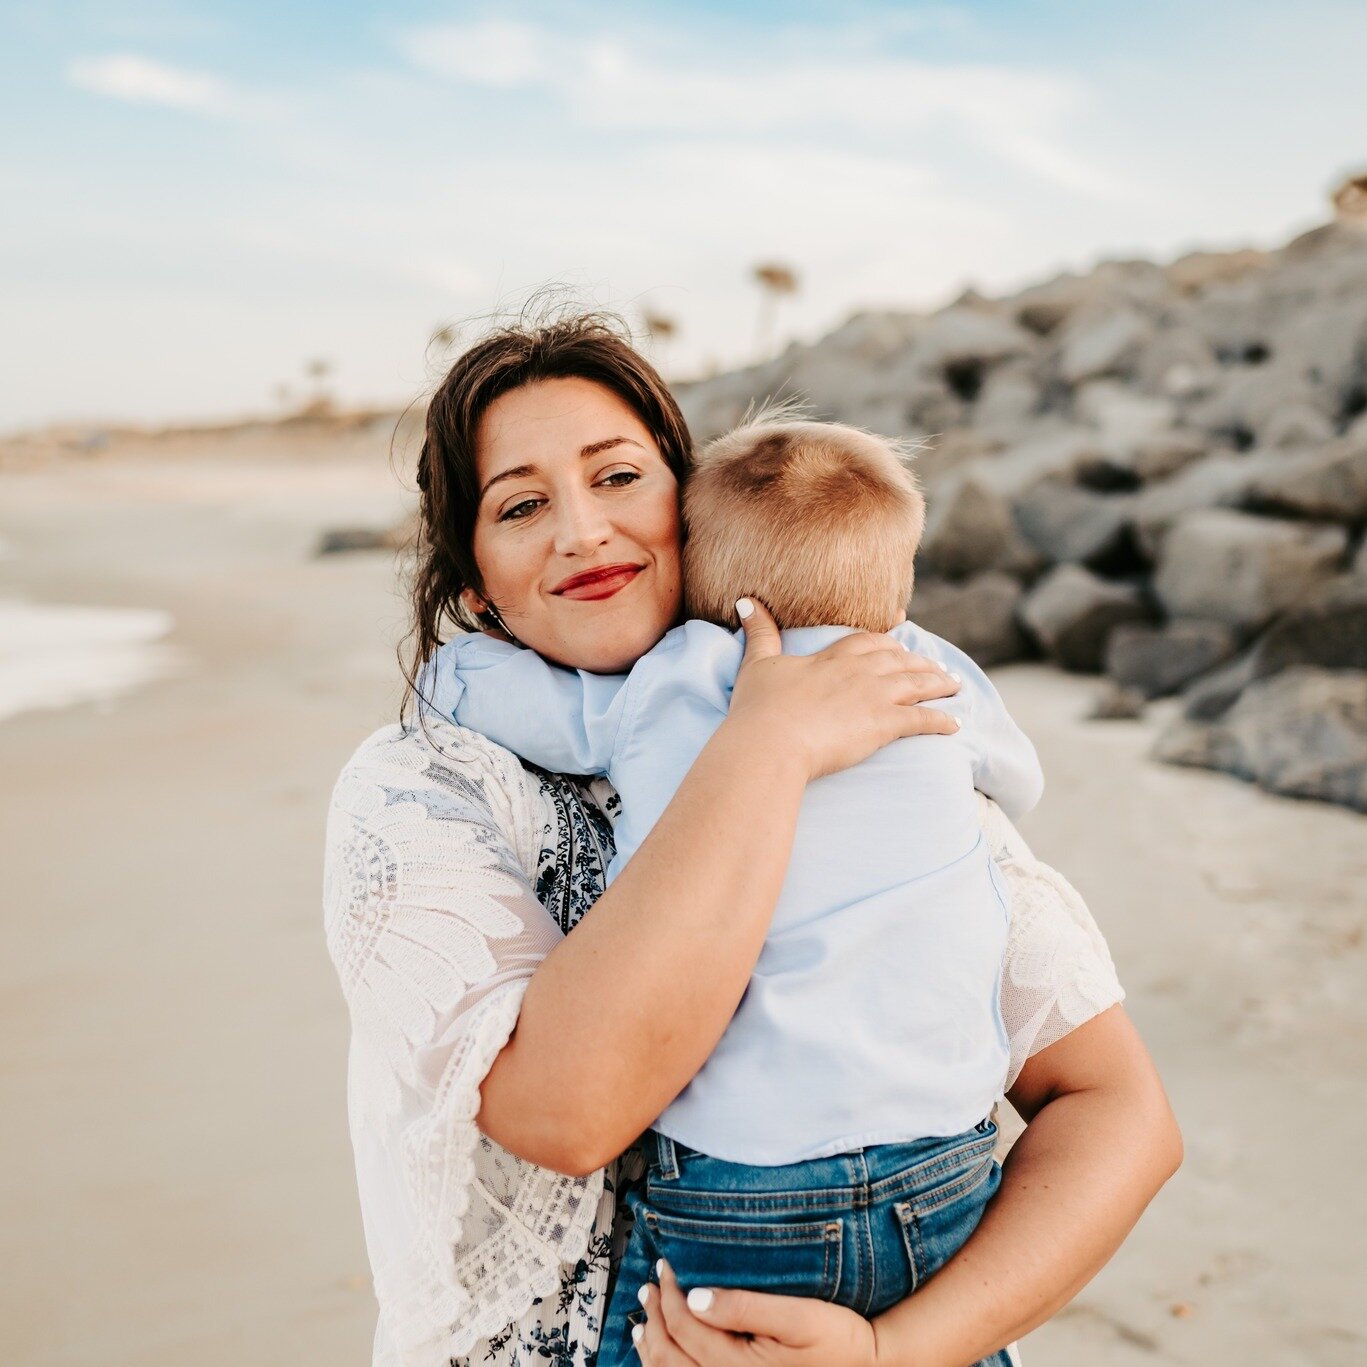 You are their whole world mama! You are their everything. Your kids adore you, and they are only little for such a short time. CAPTURE it mamas! Because I promise you will blink and they will be grown. 
I absolutely adored meeting this sweet mama and